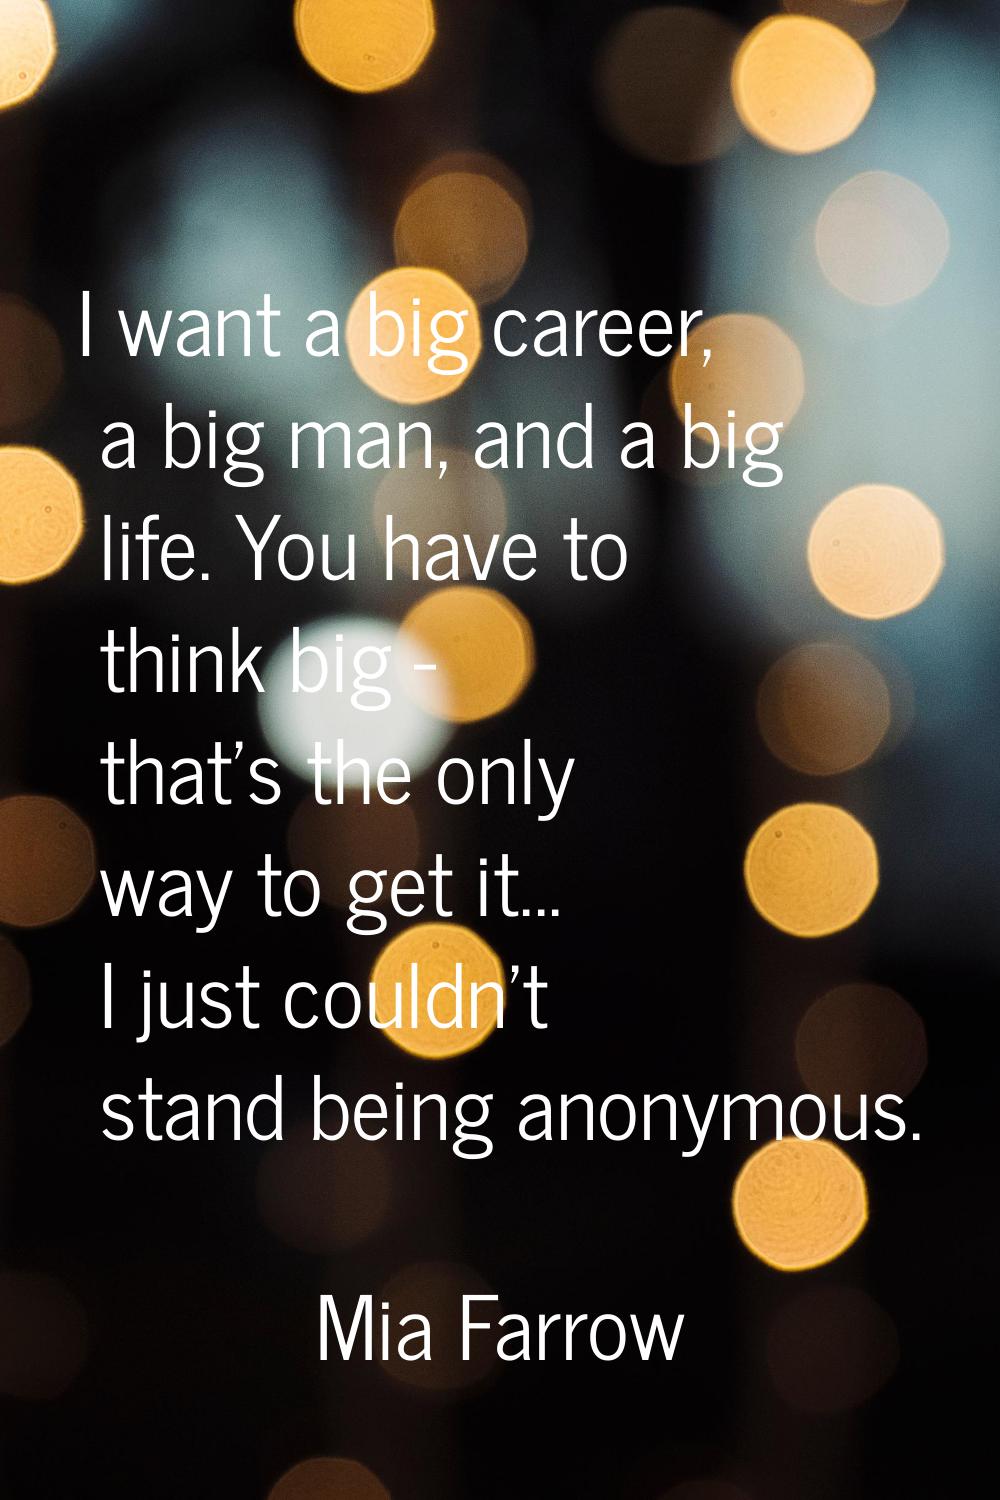 I want a big career, a big man, and a big life. You have to think big - that's the only way to get 